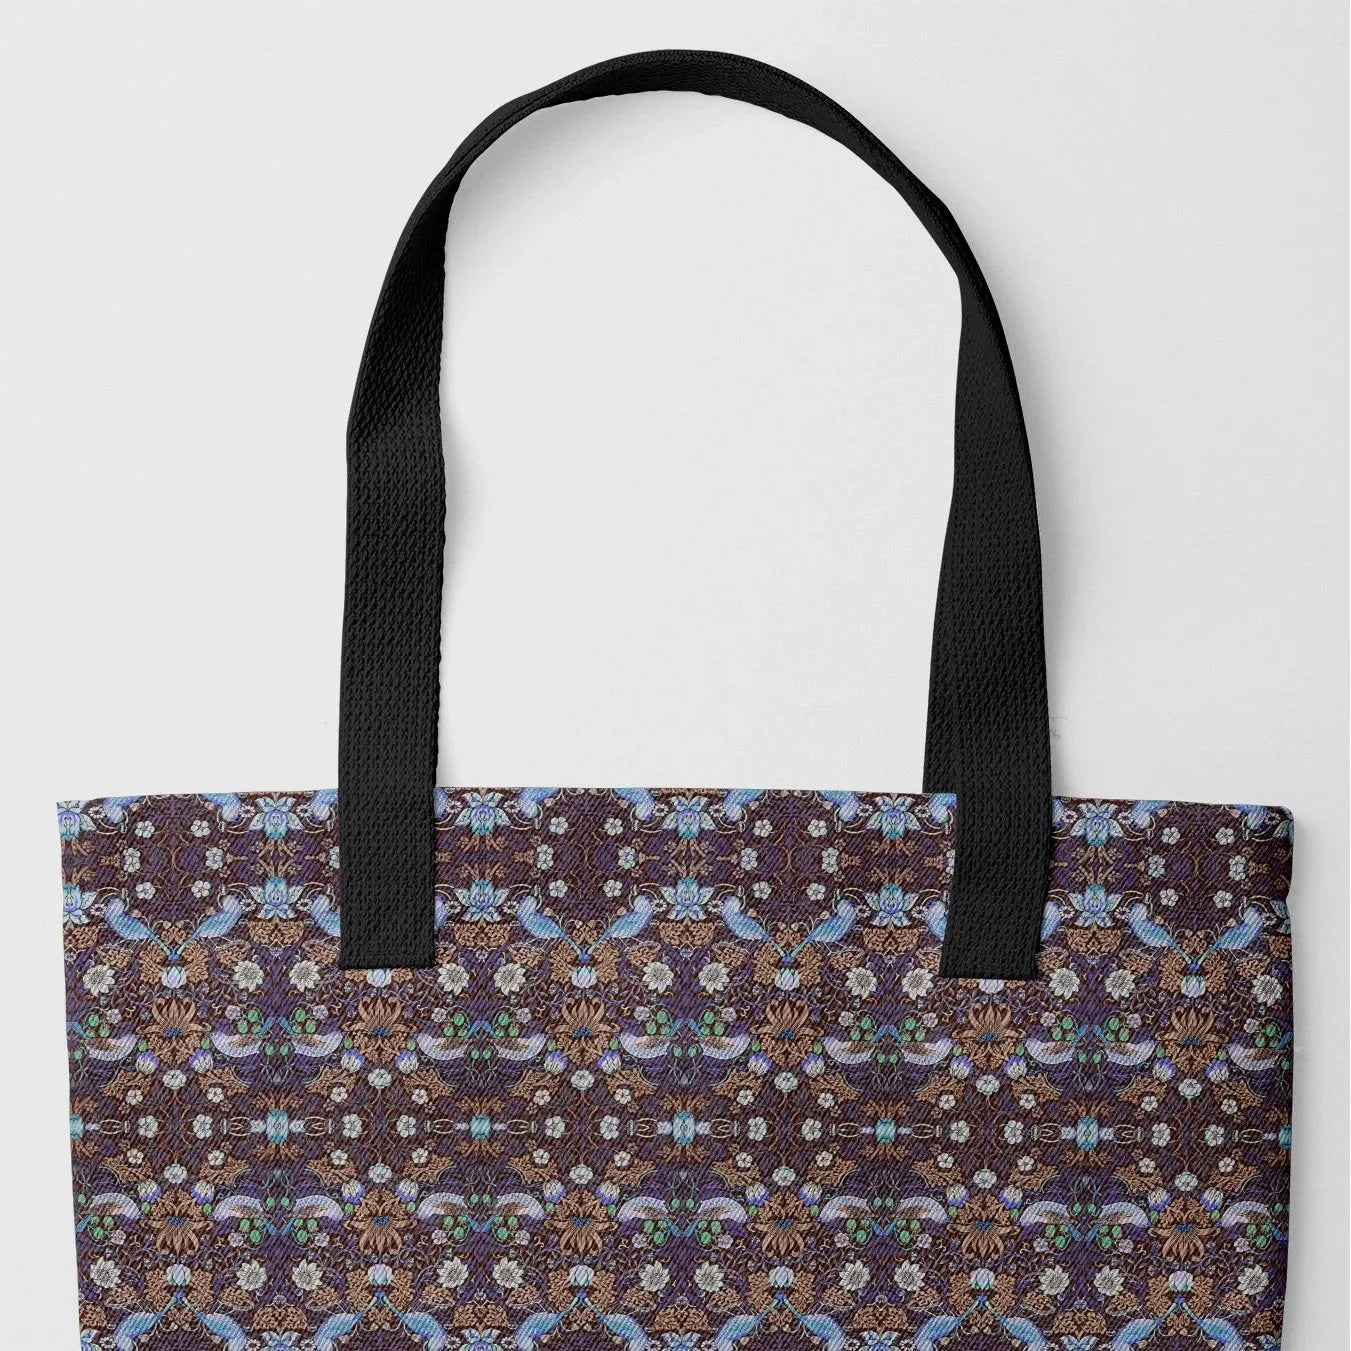 Strawberry Thief Too x 2 Tote - Heavy Duty Reusable Grocery Bag - Black Handles - Shopping Totes - Aesthetic Art